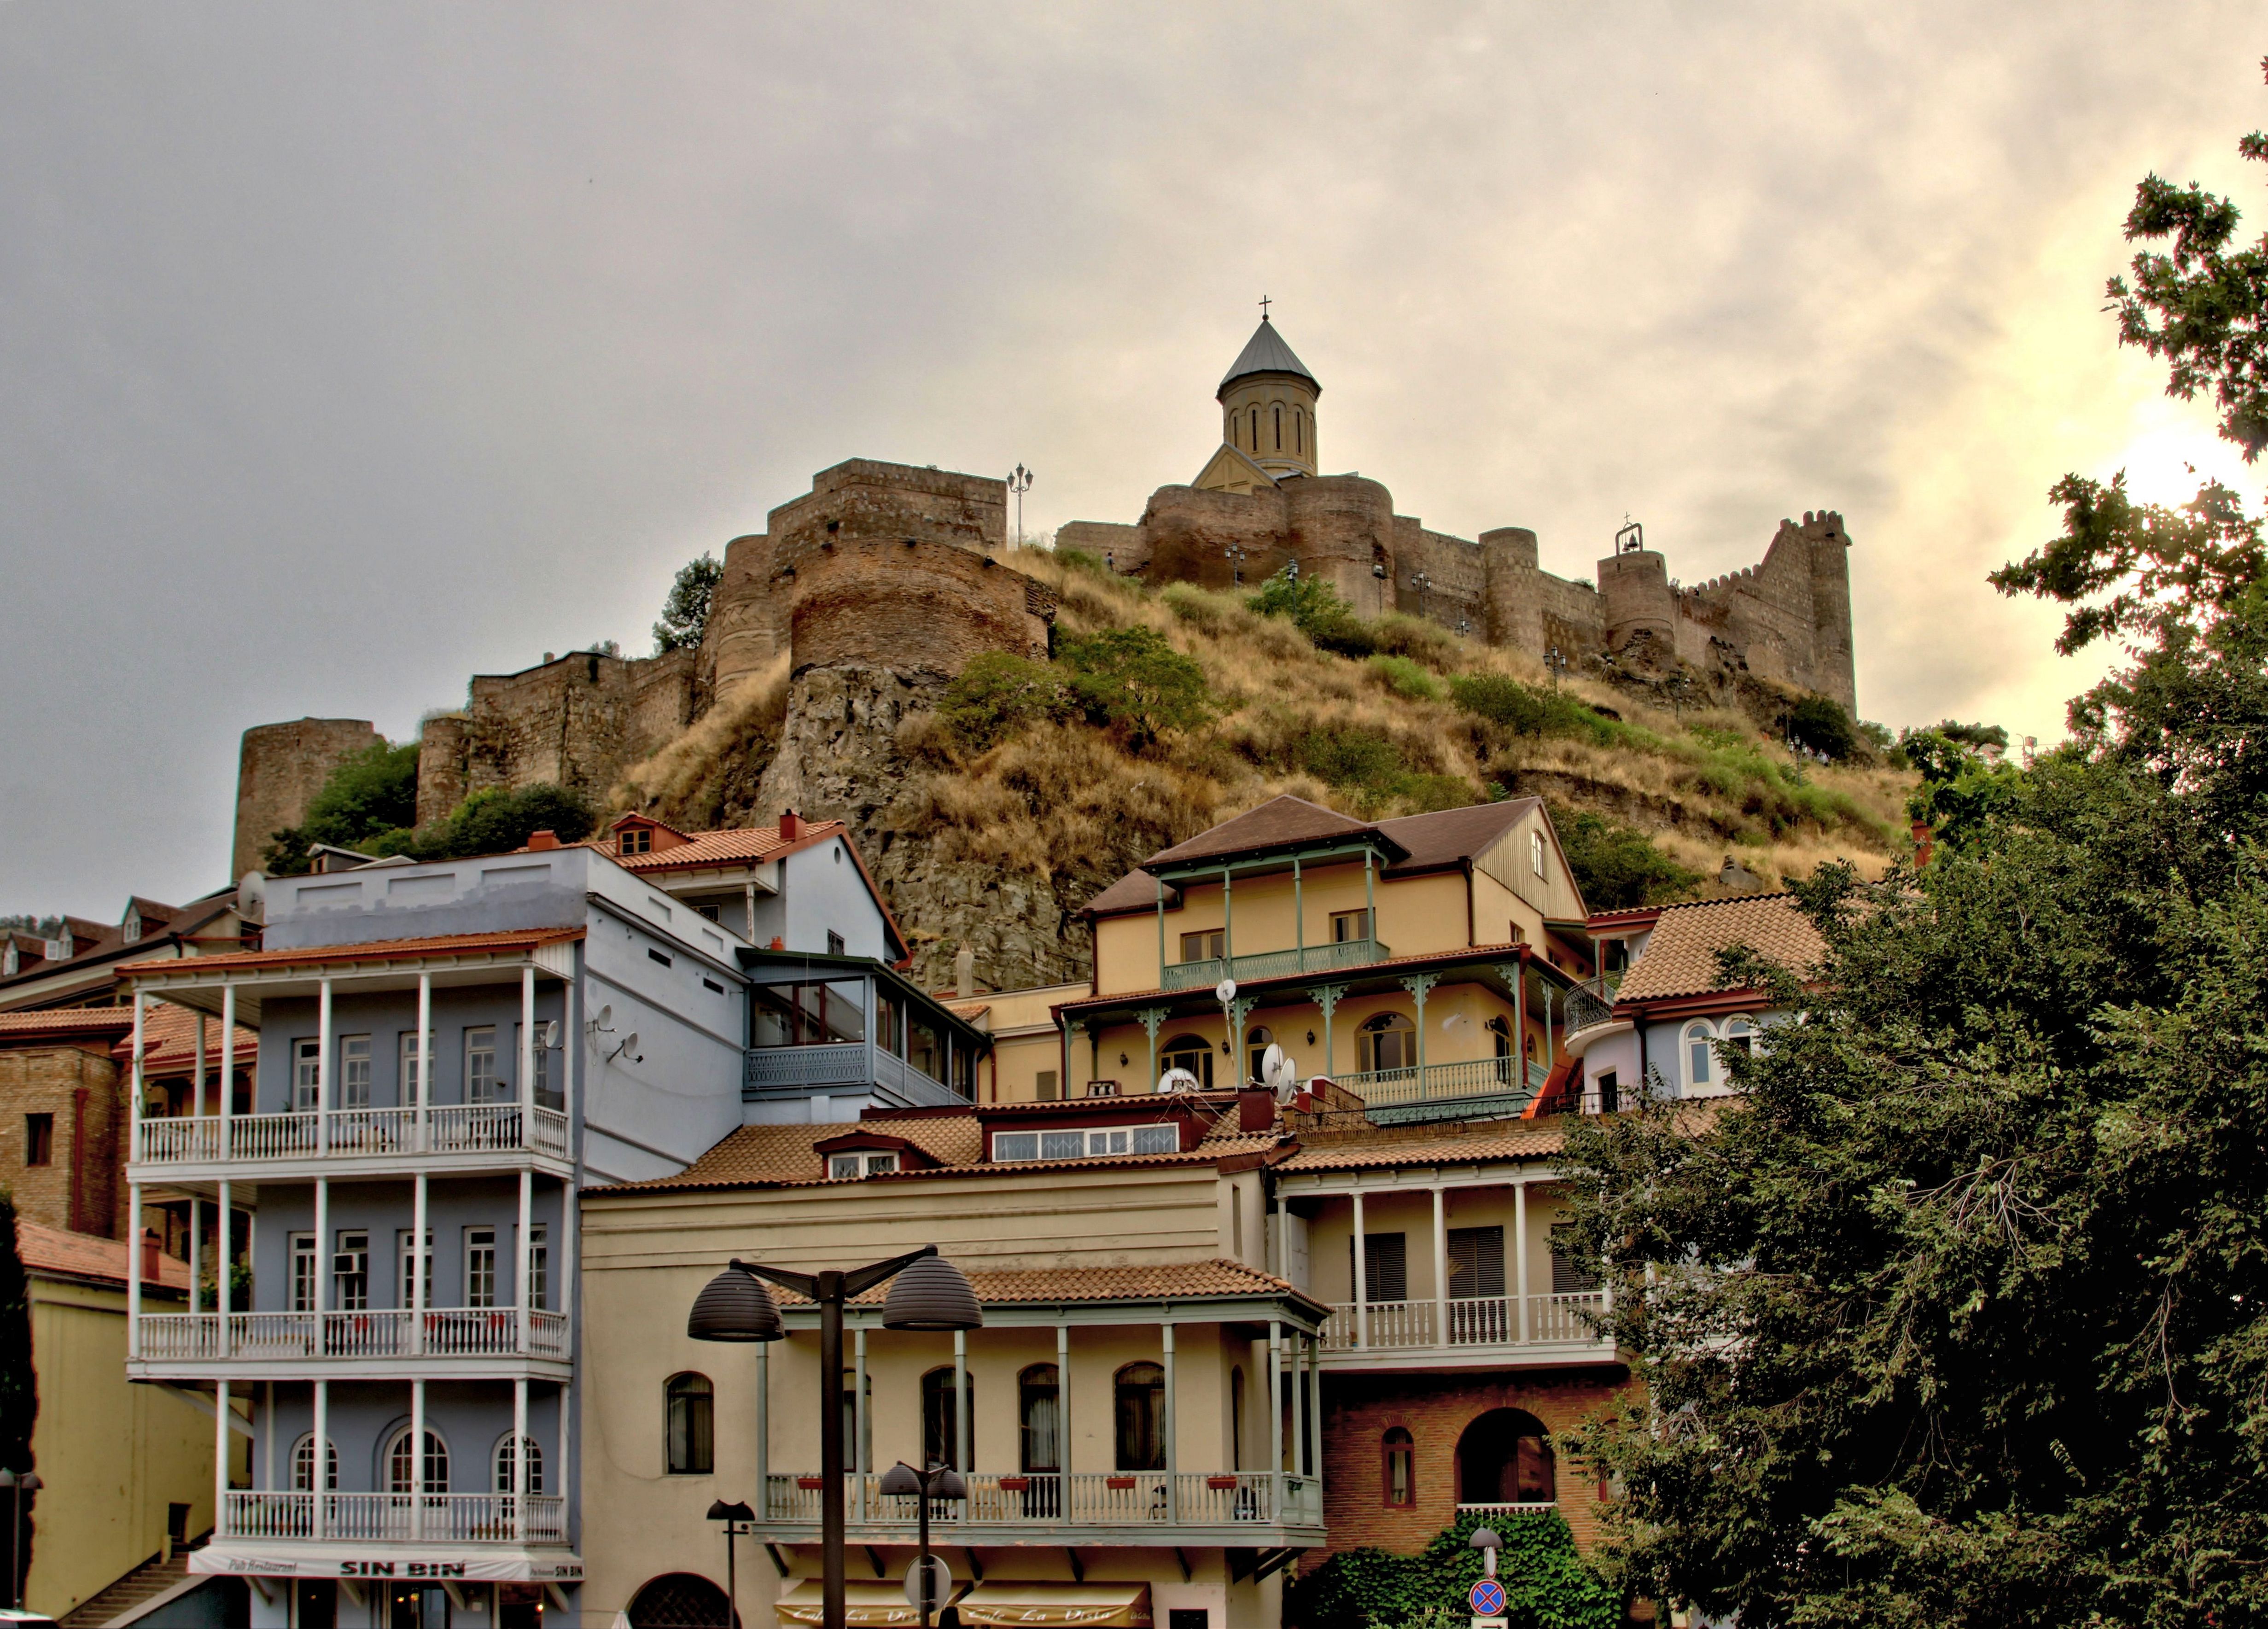 Tbilisi old city with fortress and church